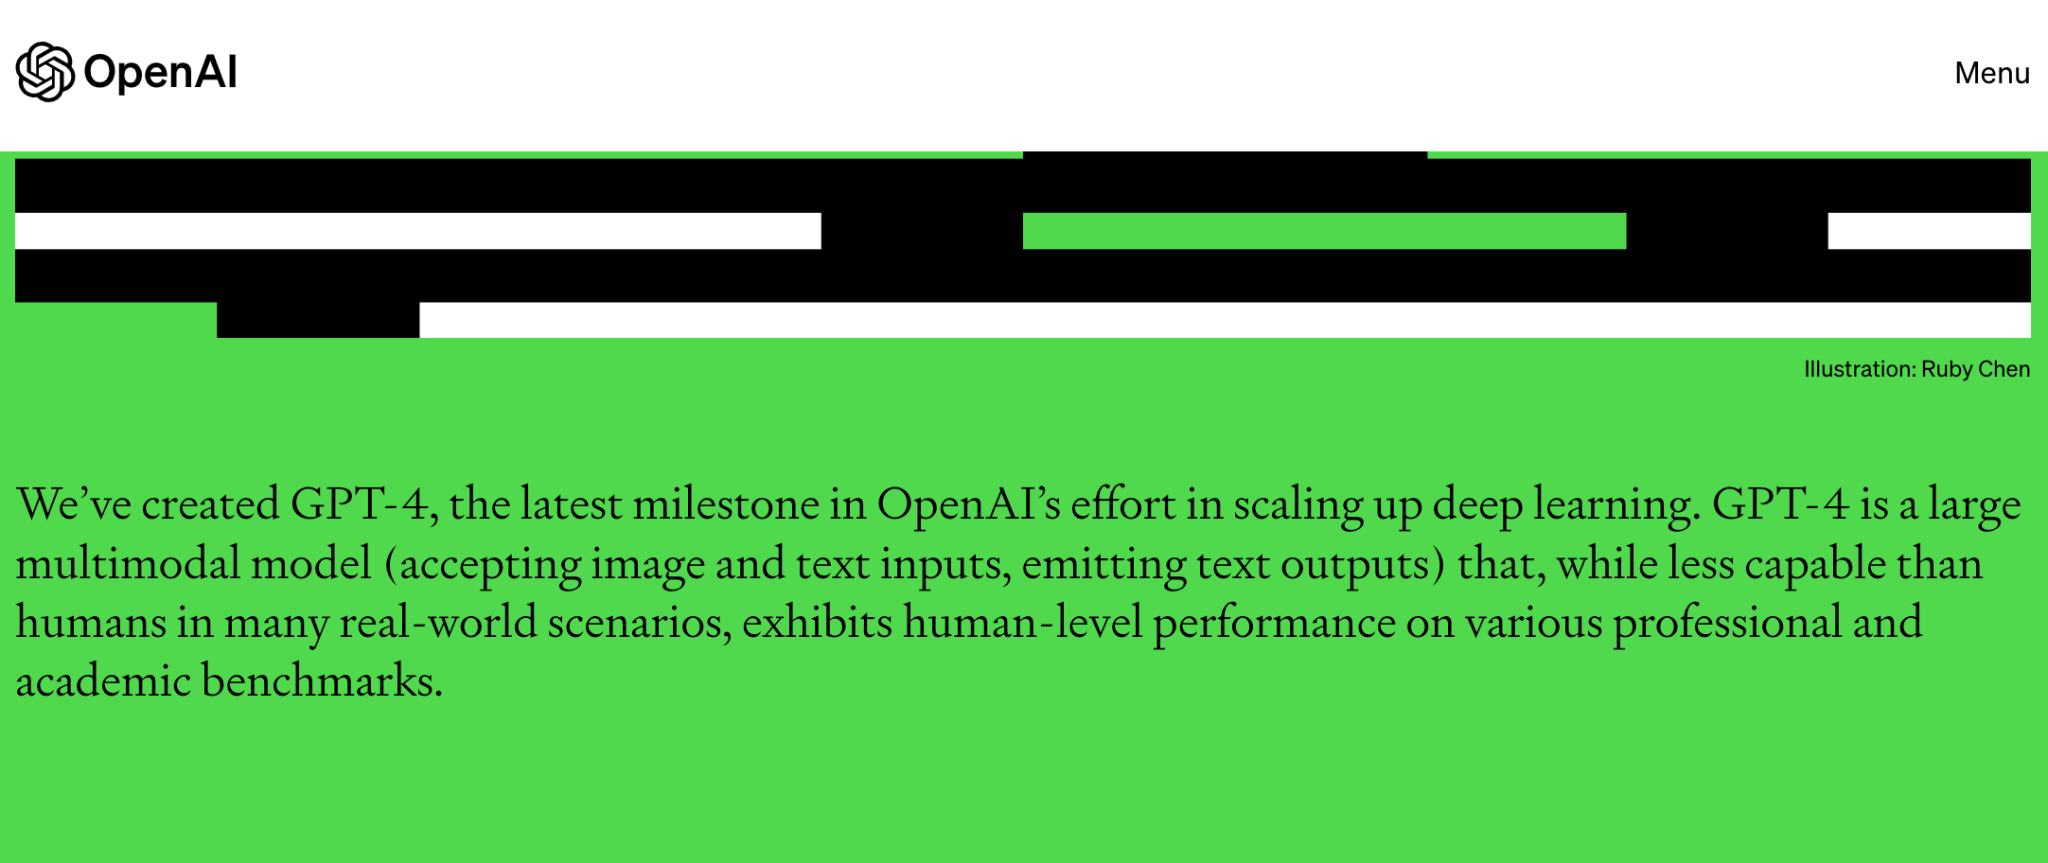 OpenAi's Introduction For GPT-4 Modality